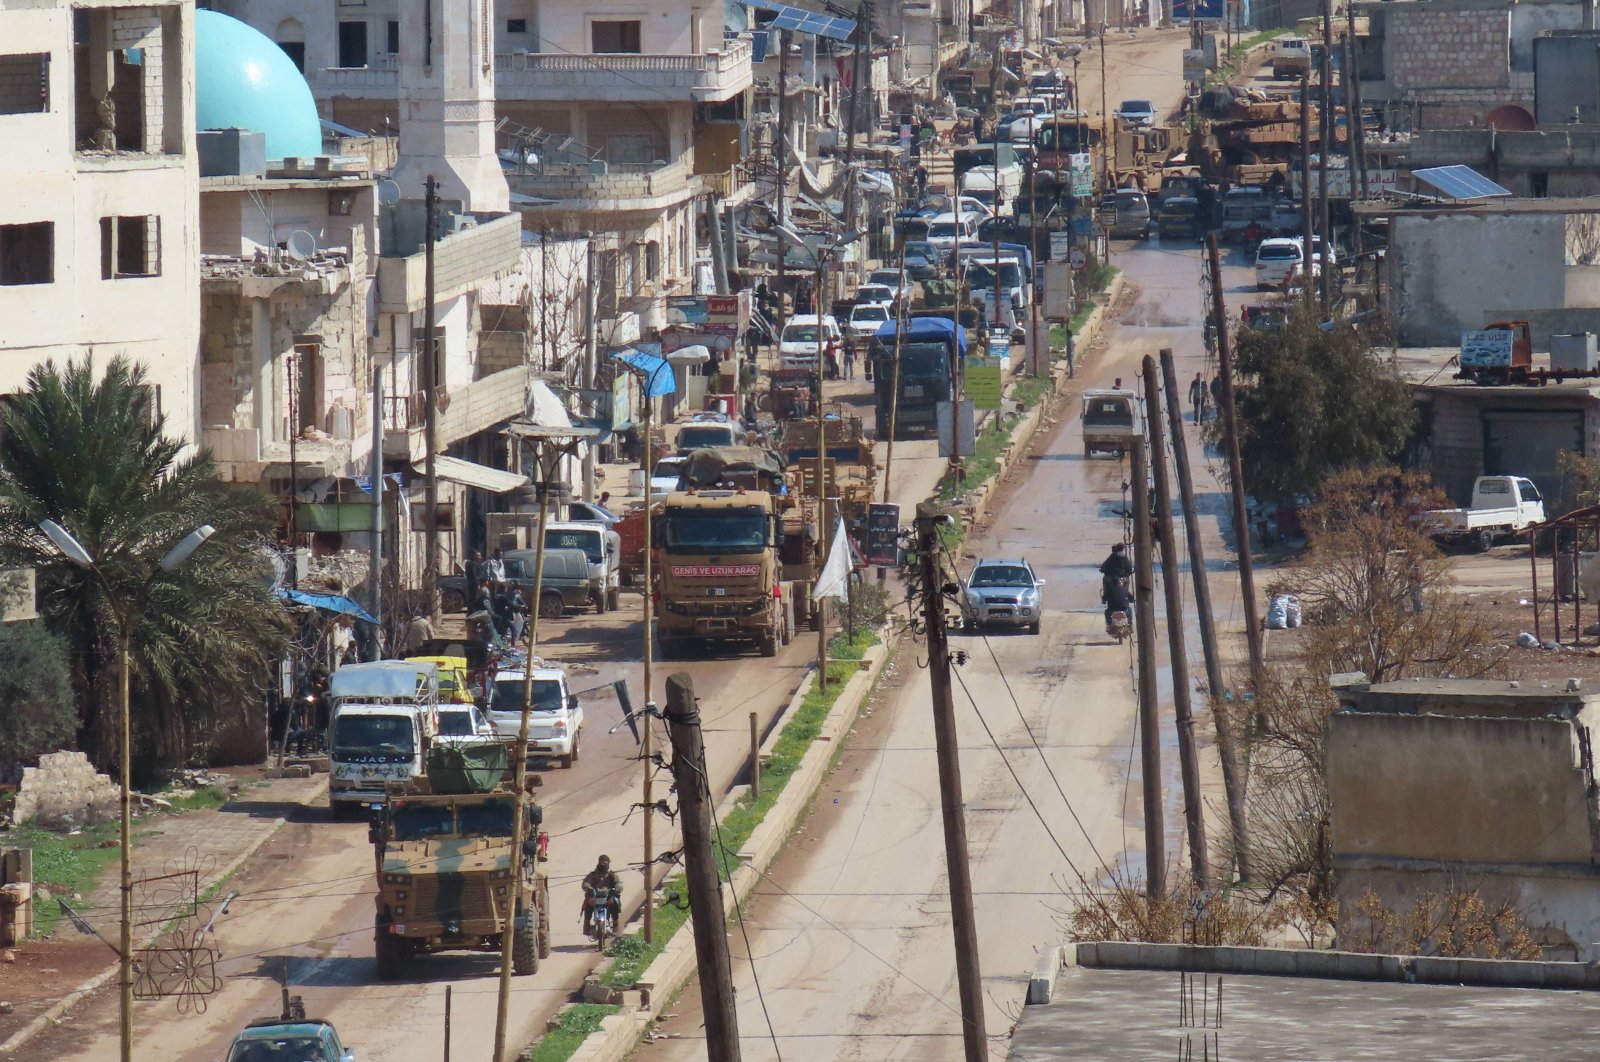 A Turkish military convoy drives through the town of Binnish, in Syria’s northwestern Idlib province near the Turkish border, Thursday, March 19, 2020. (AFP)